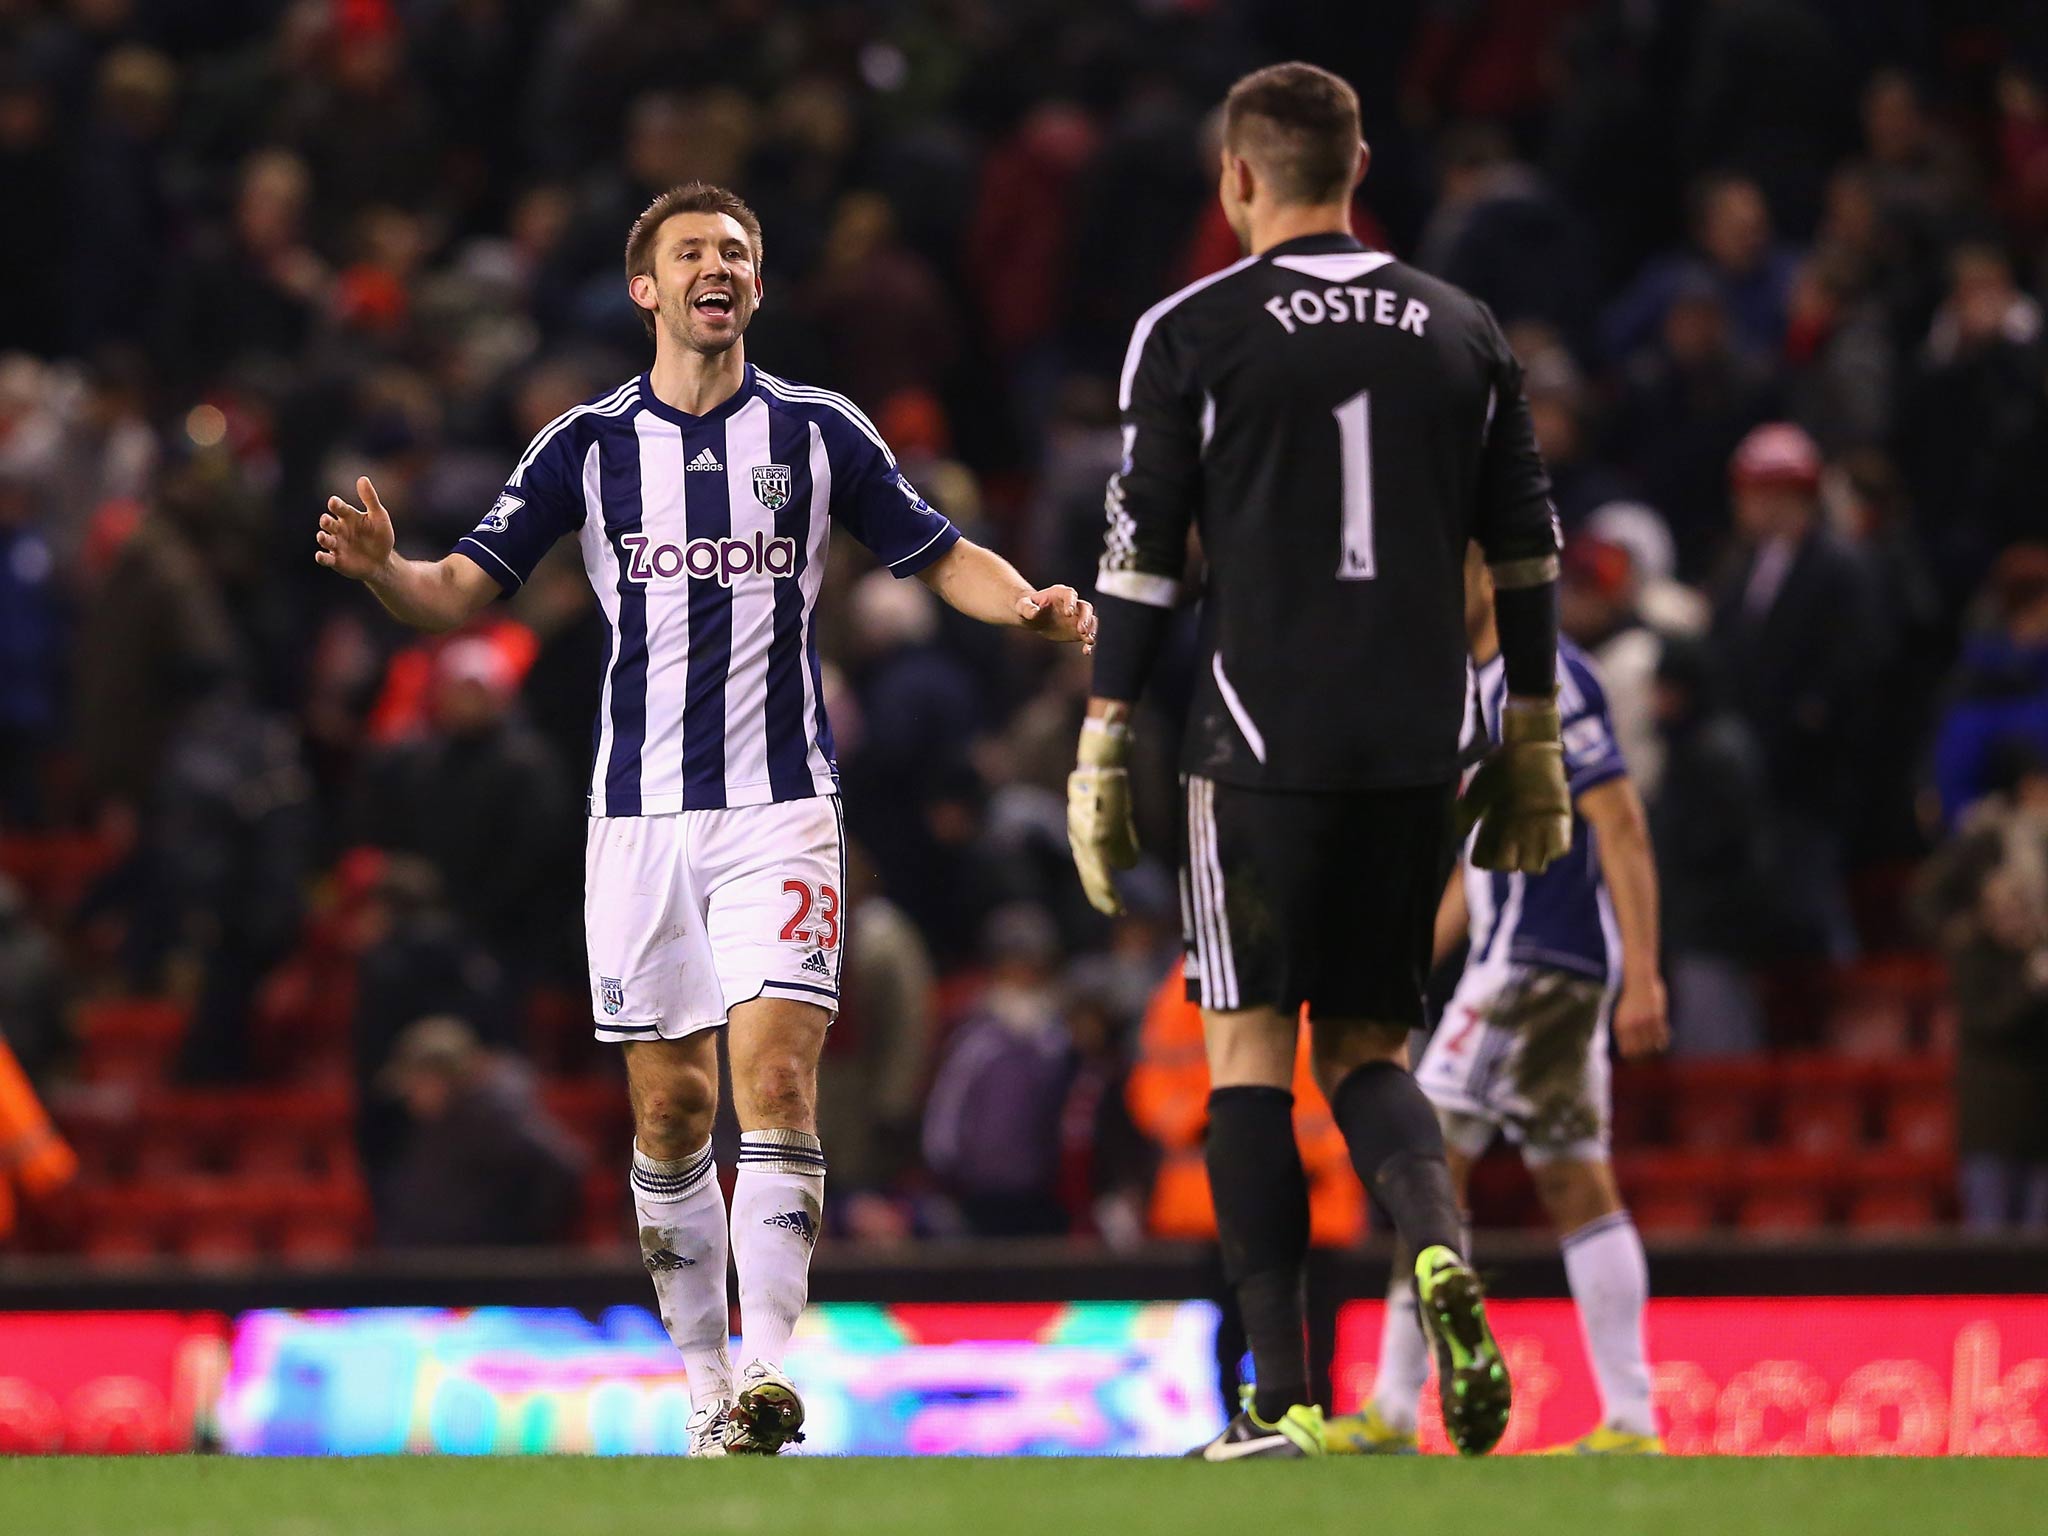 Gareth McAuley and Ben Foster of West Brom celebrate victory over Liverpool at Anfield